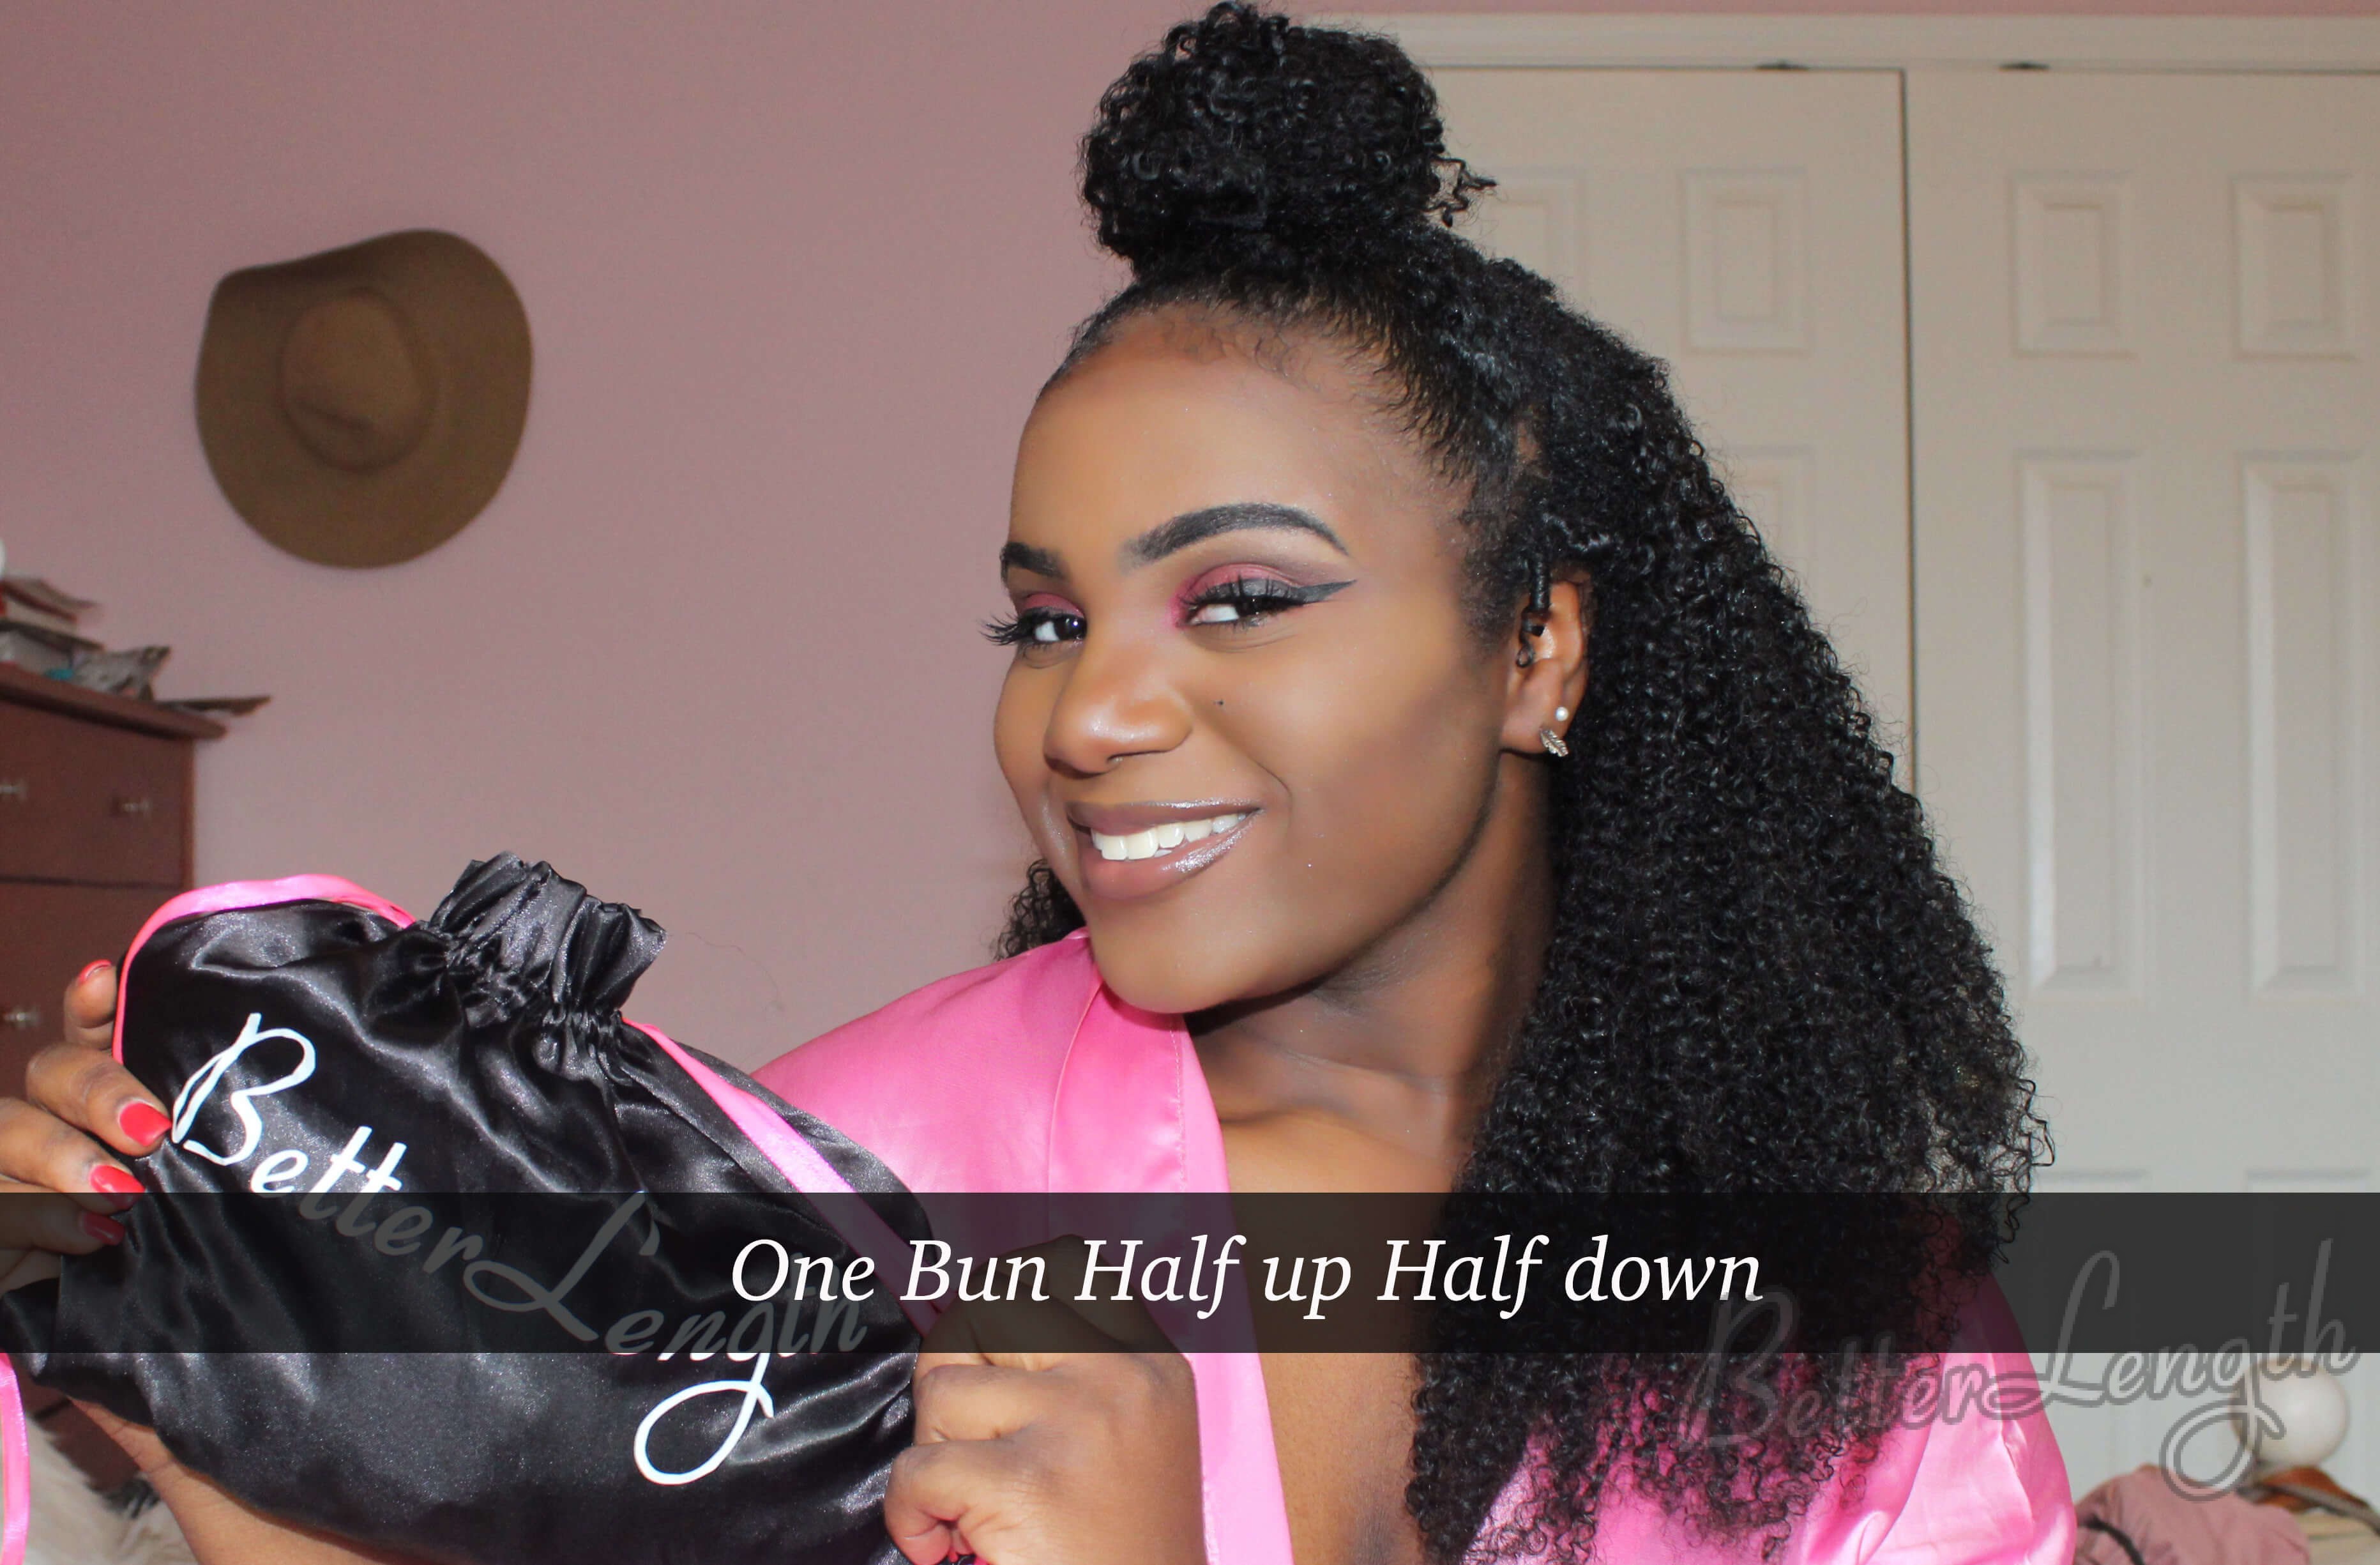 onebunhalfupandhalfdownhairstyle - Top 4 Quick and Easy Bun Hairstyles for Back to School